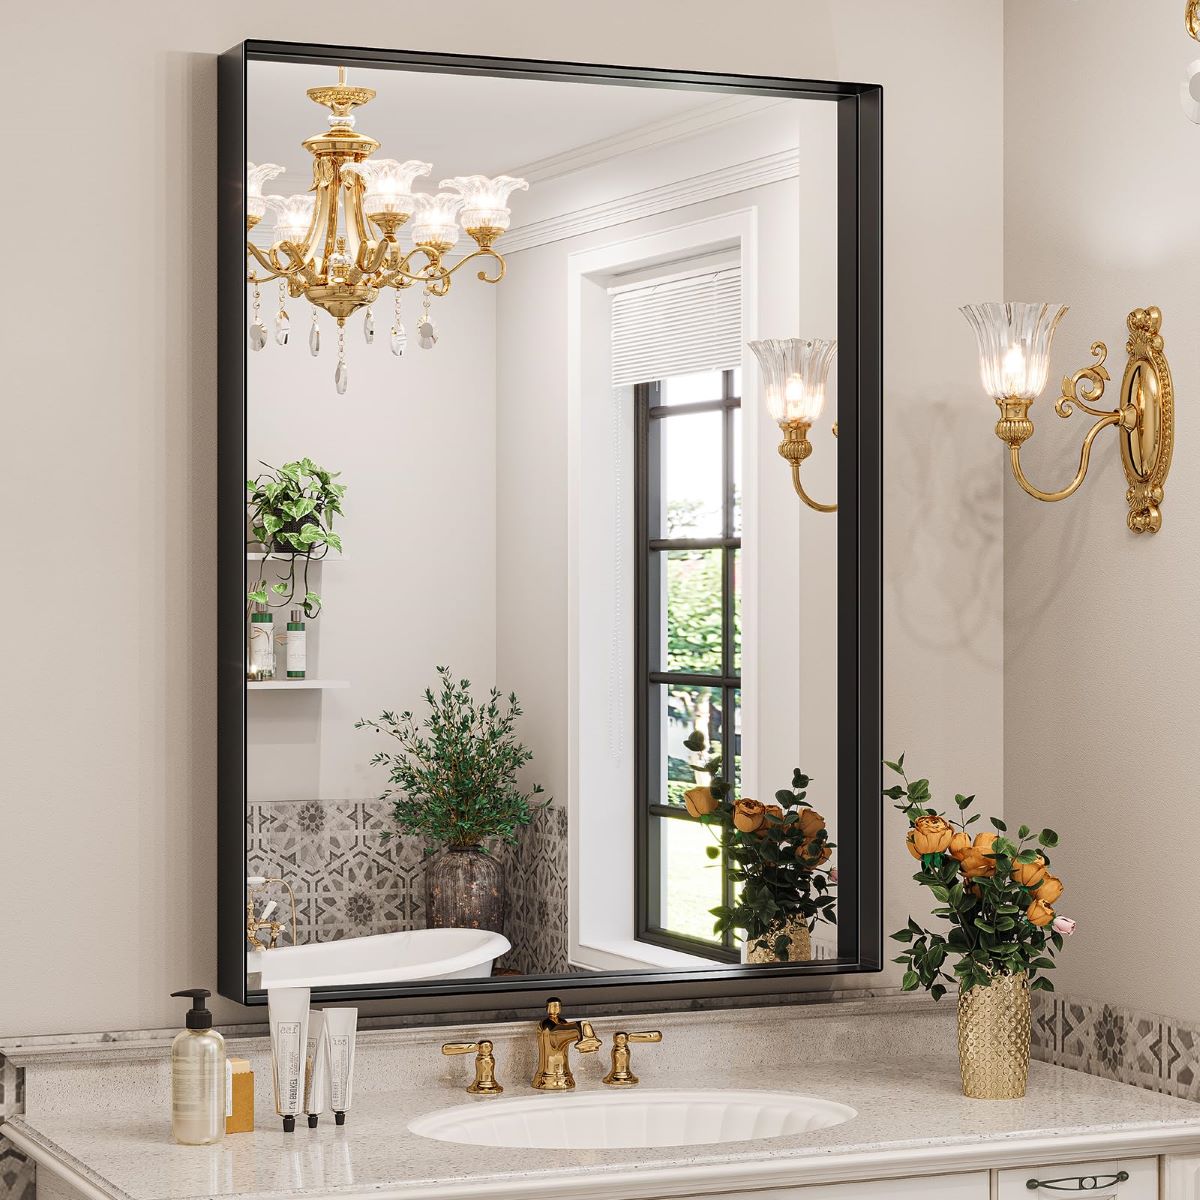 15 Superior Bathroom Mirrors For Wall For 2023 1697383939 